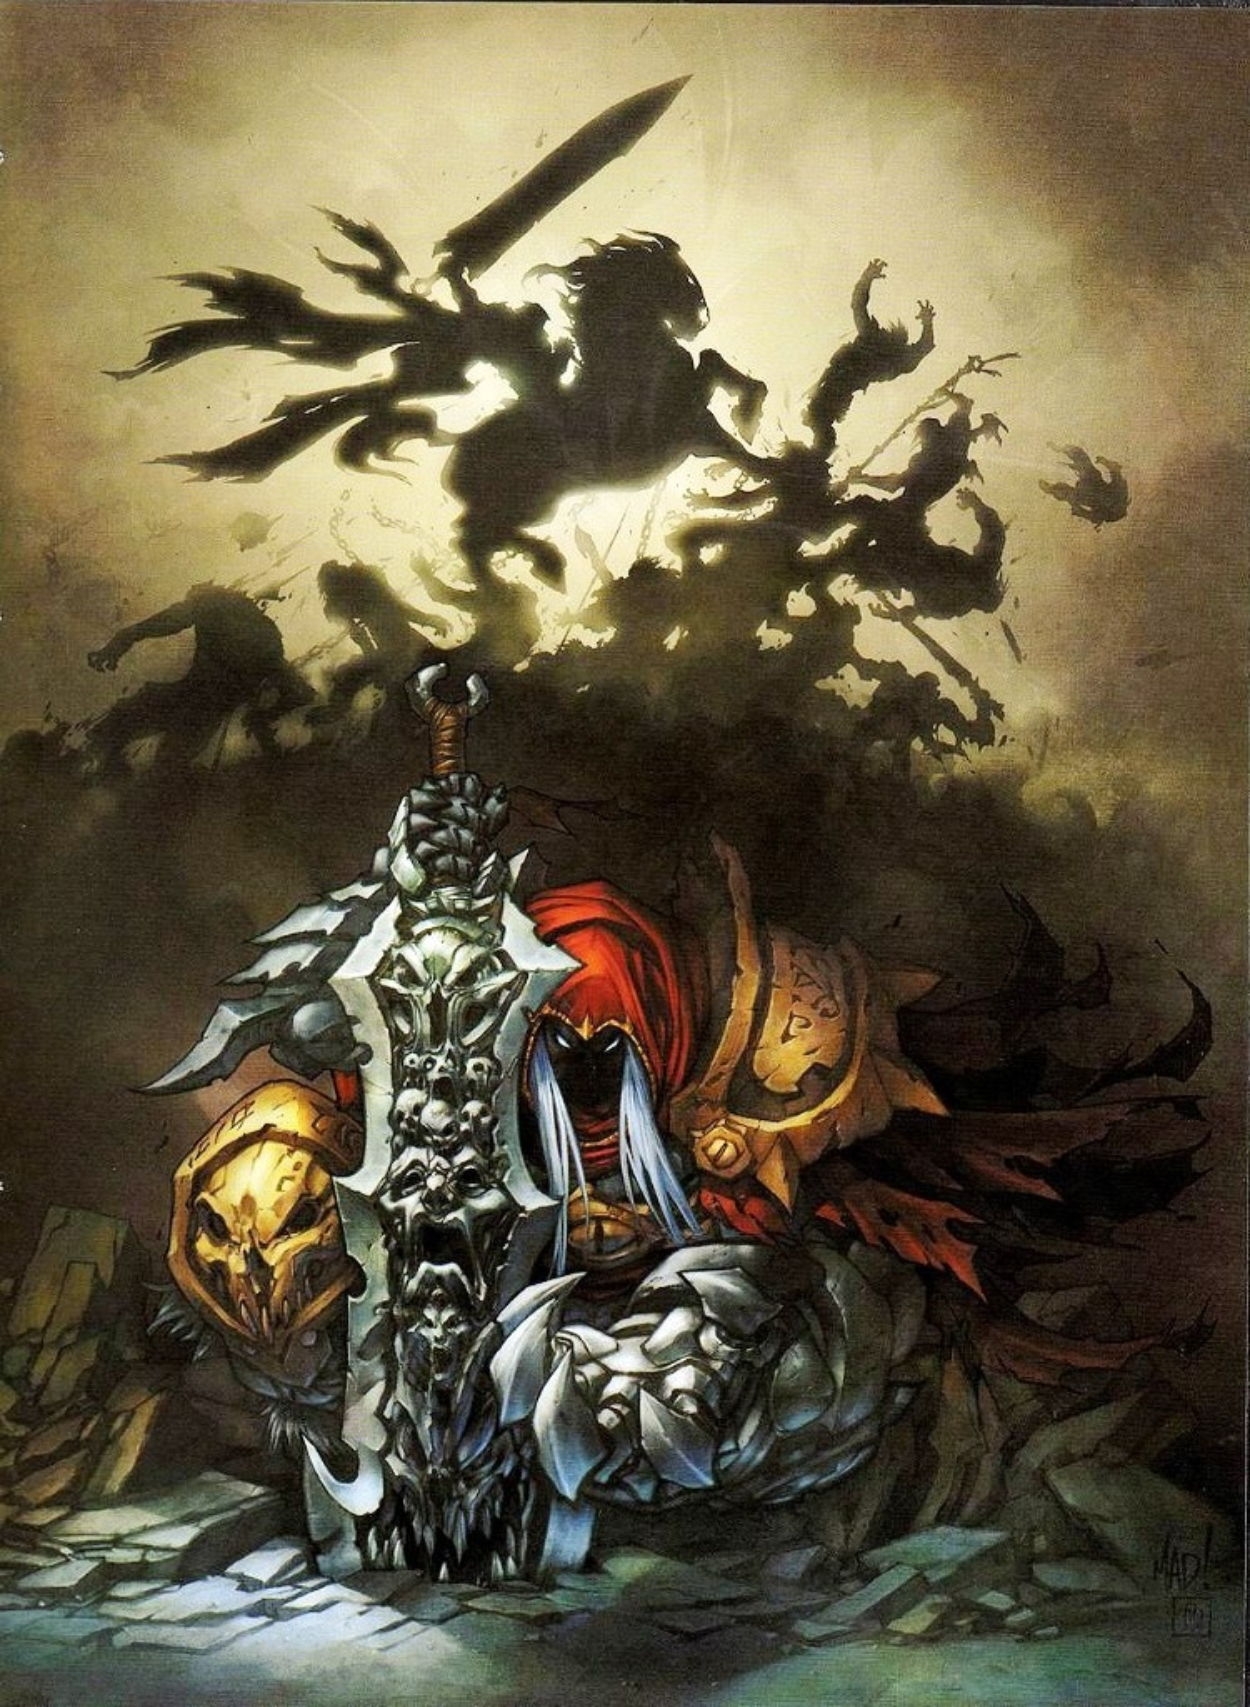 The Art of Darksiders (low-res, missing pages, and watermarked) 10